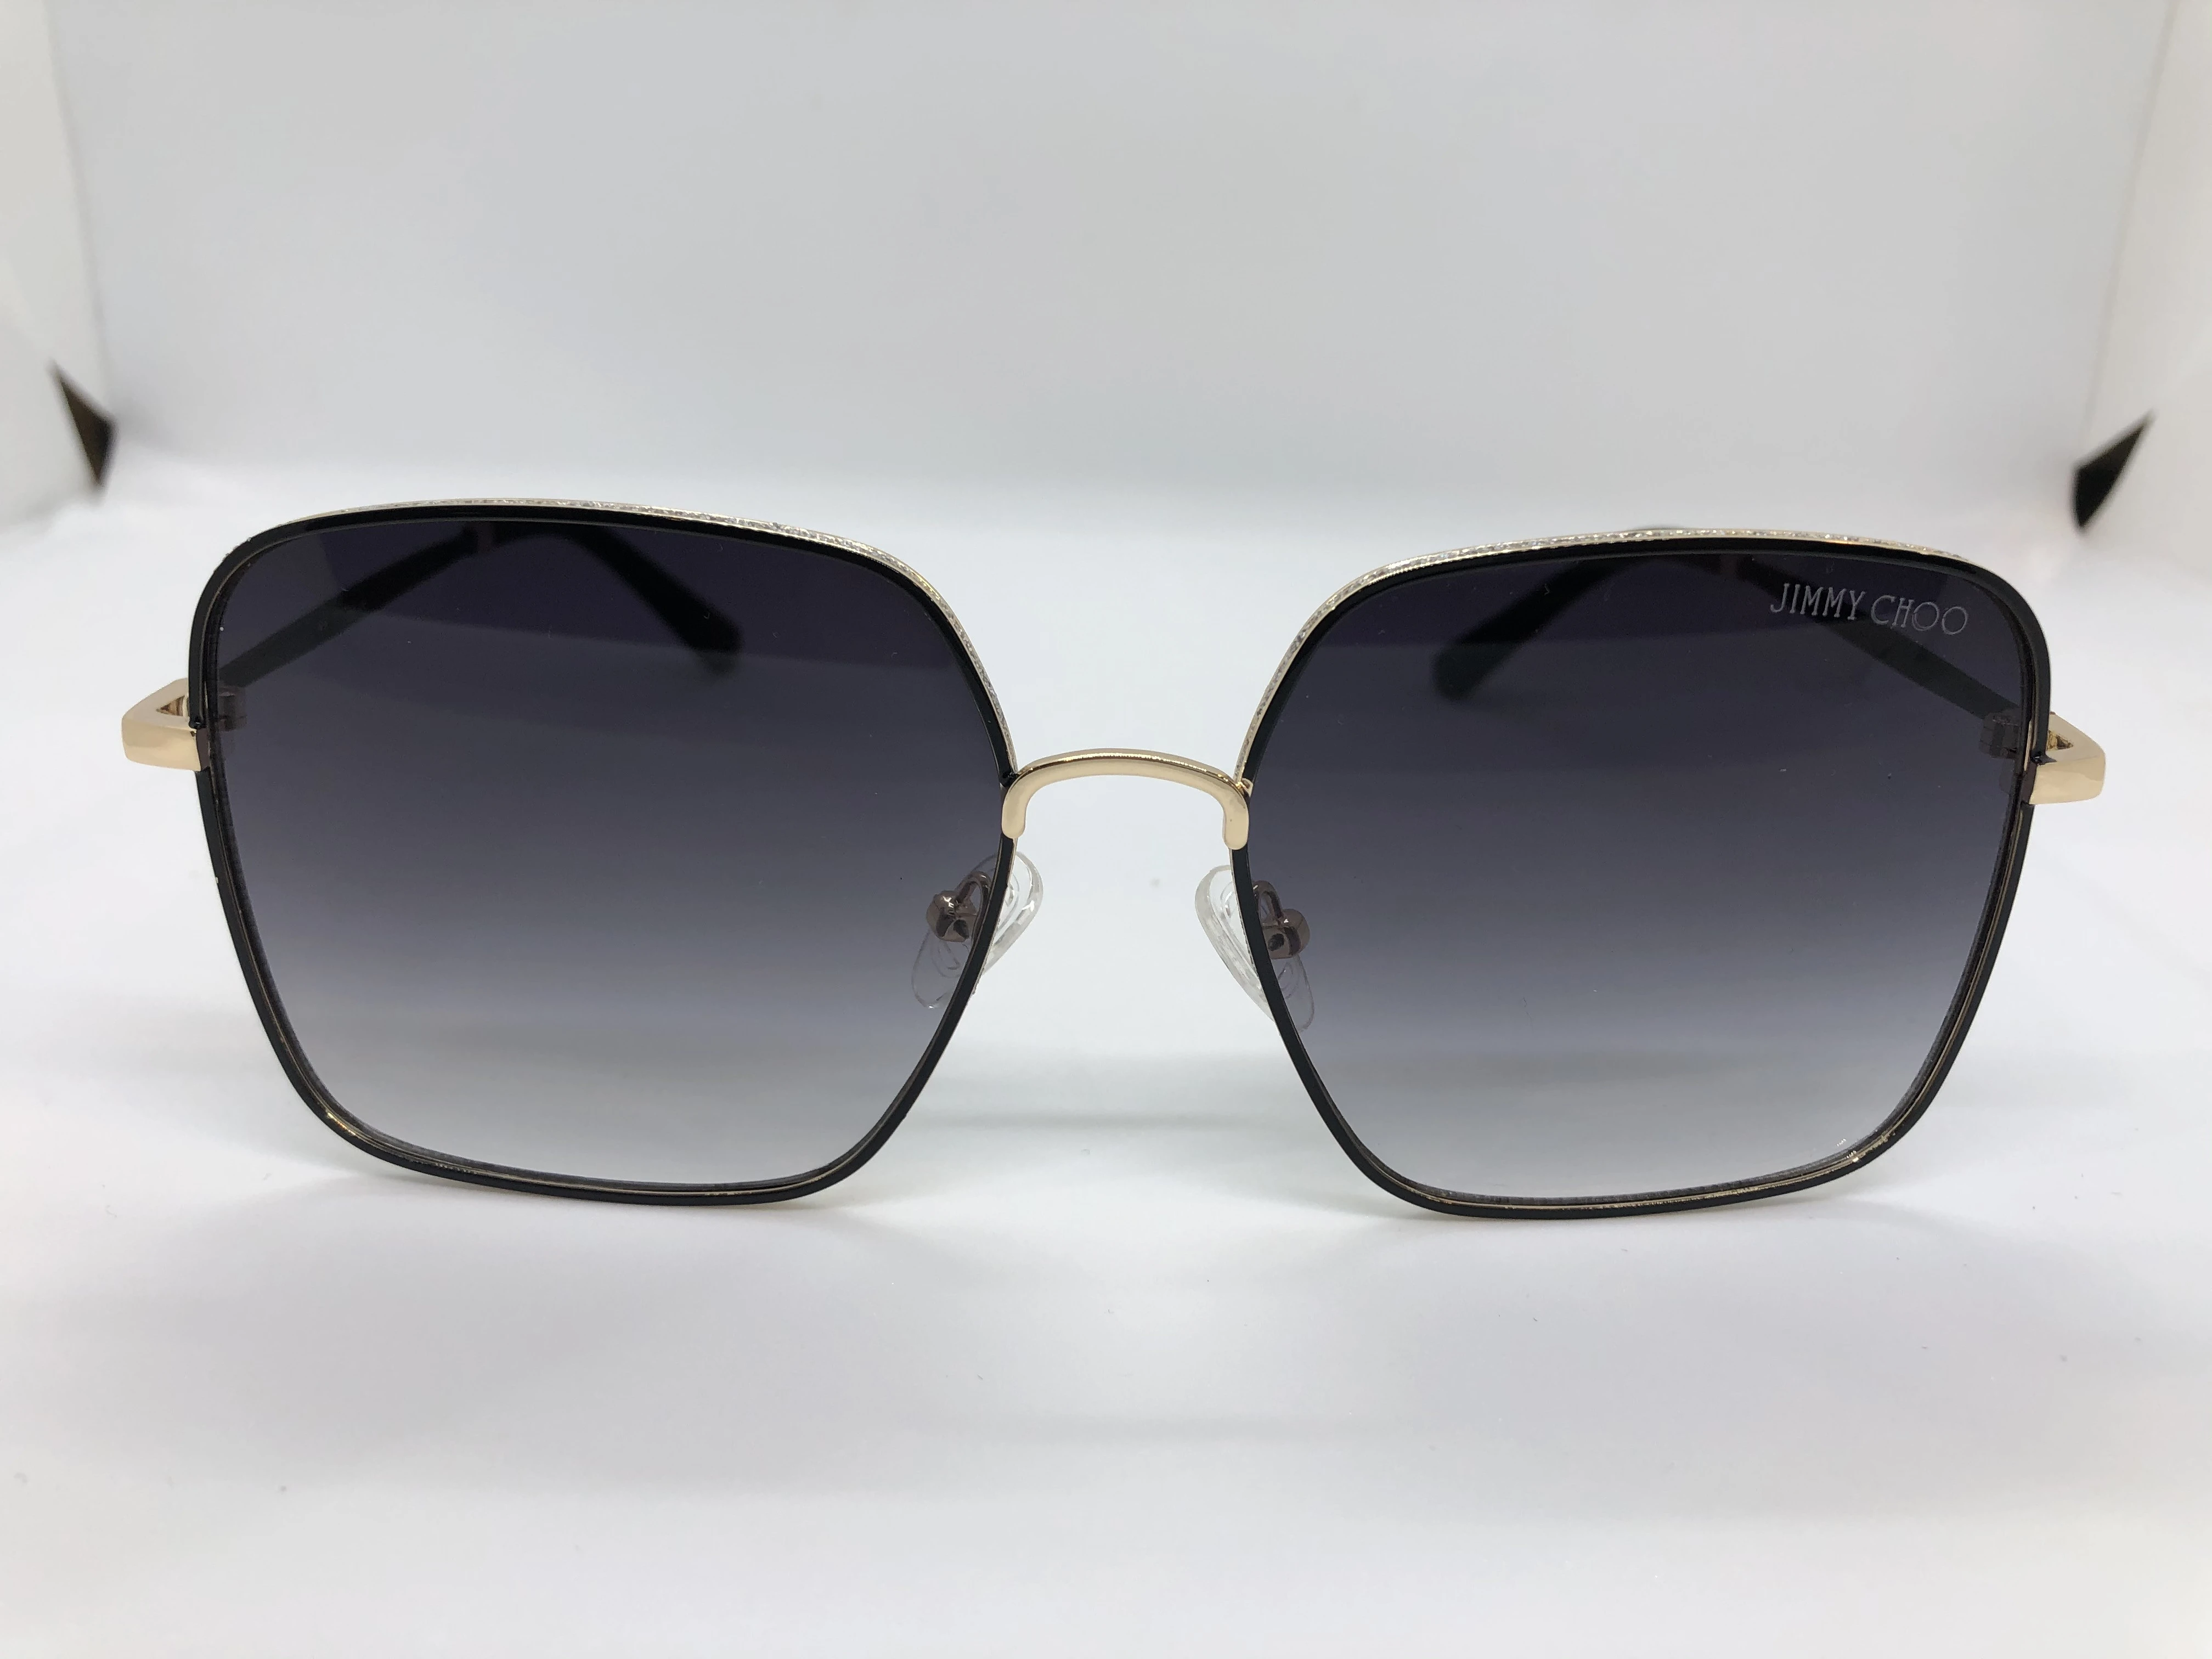 Sunglasses - Jimmy Choo - with a golden metal frame - black gradient lenses - golden metal and black polycarbonate arm - for women